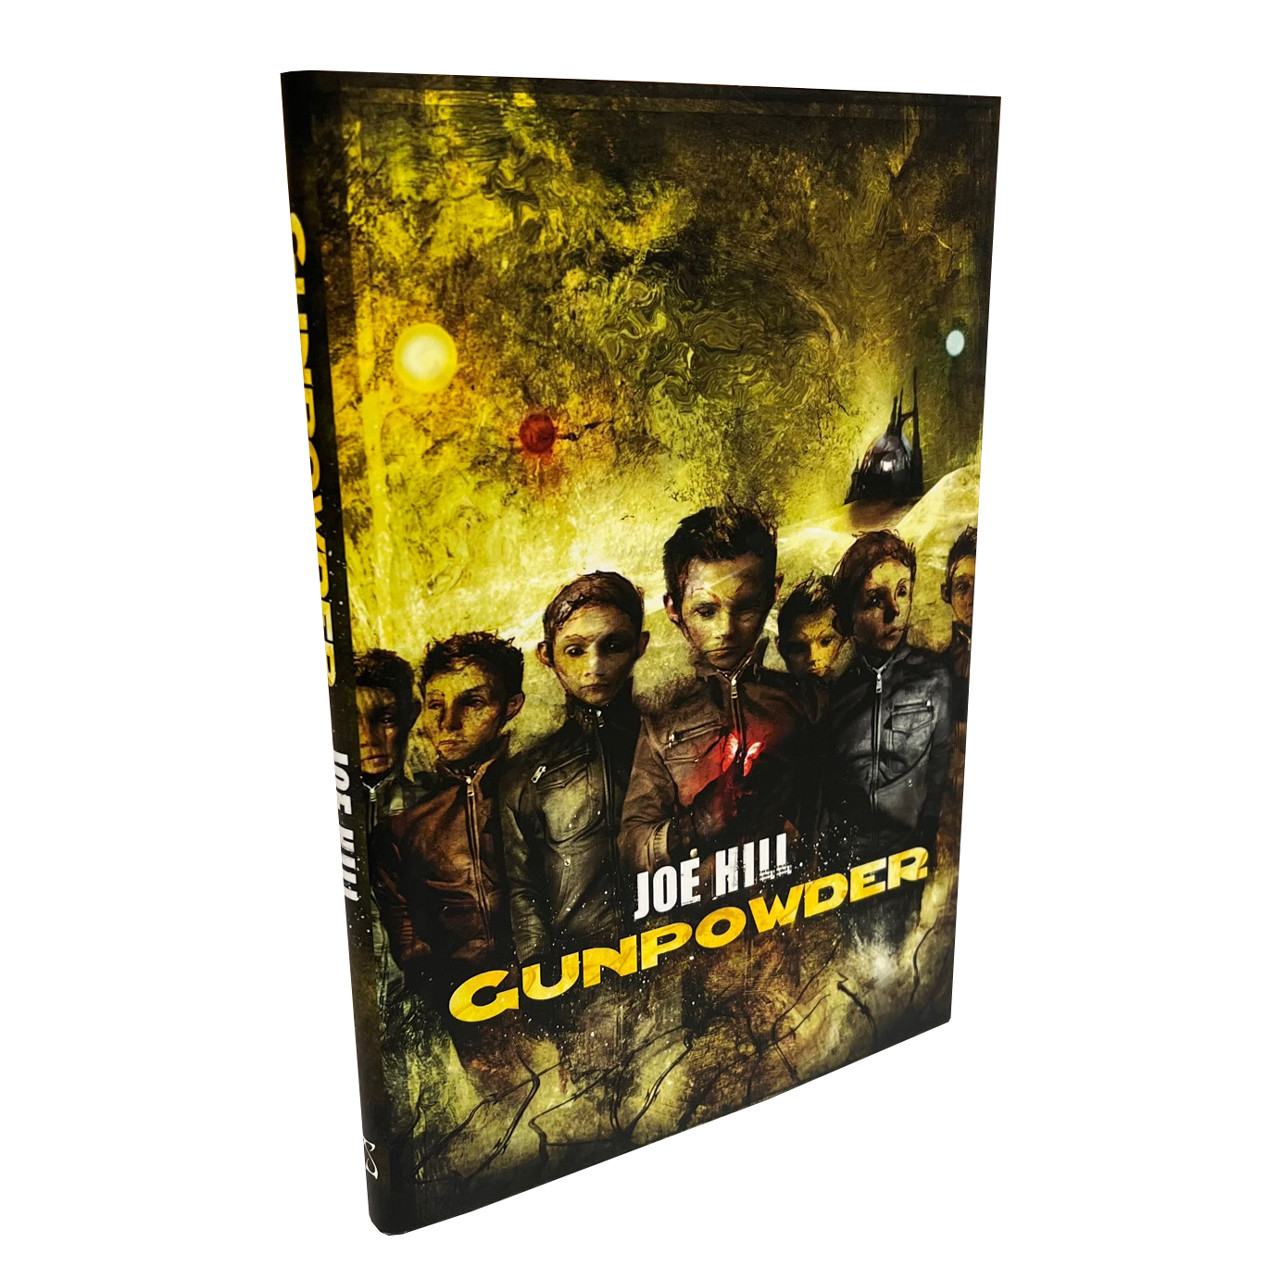 Joe Hill "Gunpowder" Signed Limited Edition No. 110 of 300, First Edition [Very Fine]